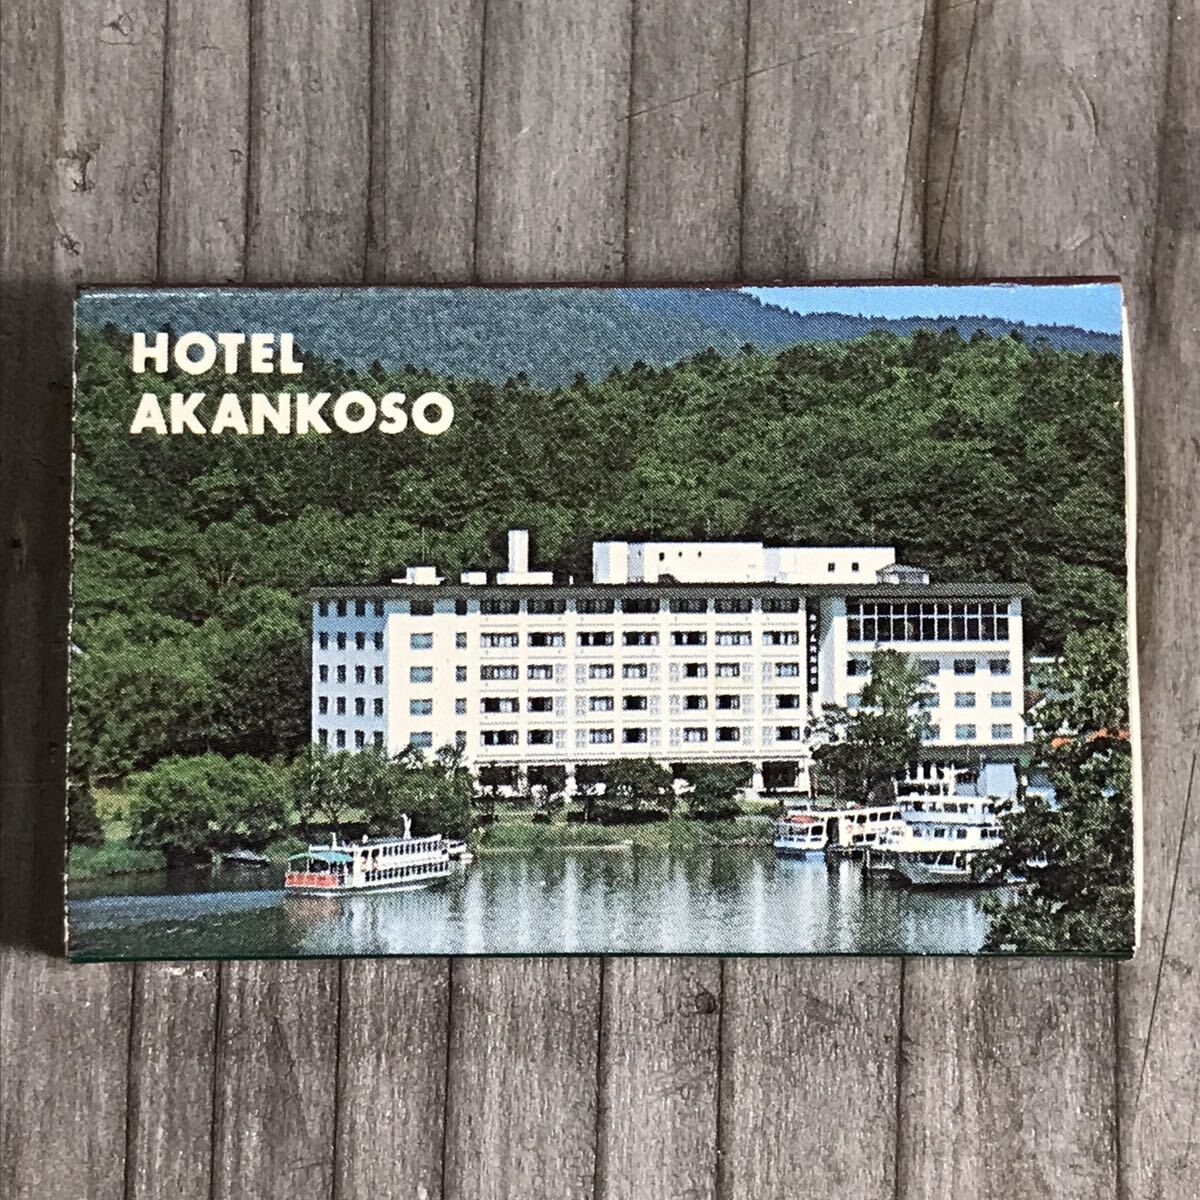  long-term keeping goods at that time matchbox hotel . cold lake . Hokkaido search . cold national park hot spring inn . present ground local retro Showa era 